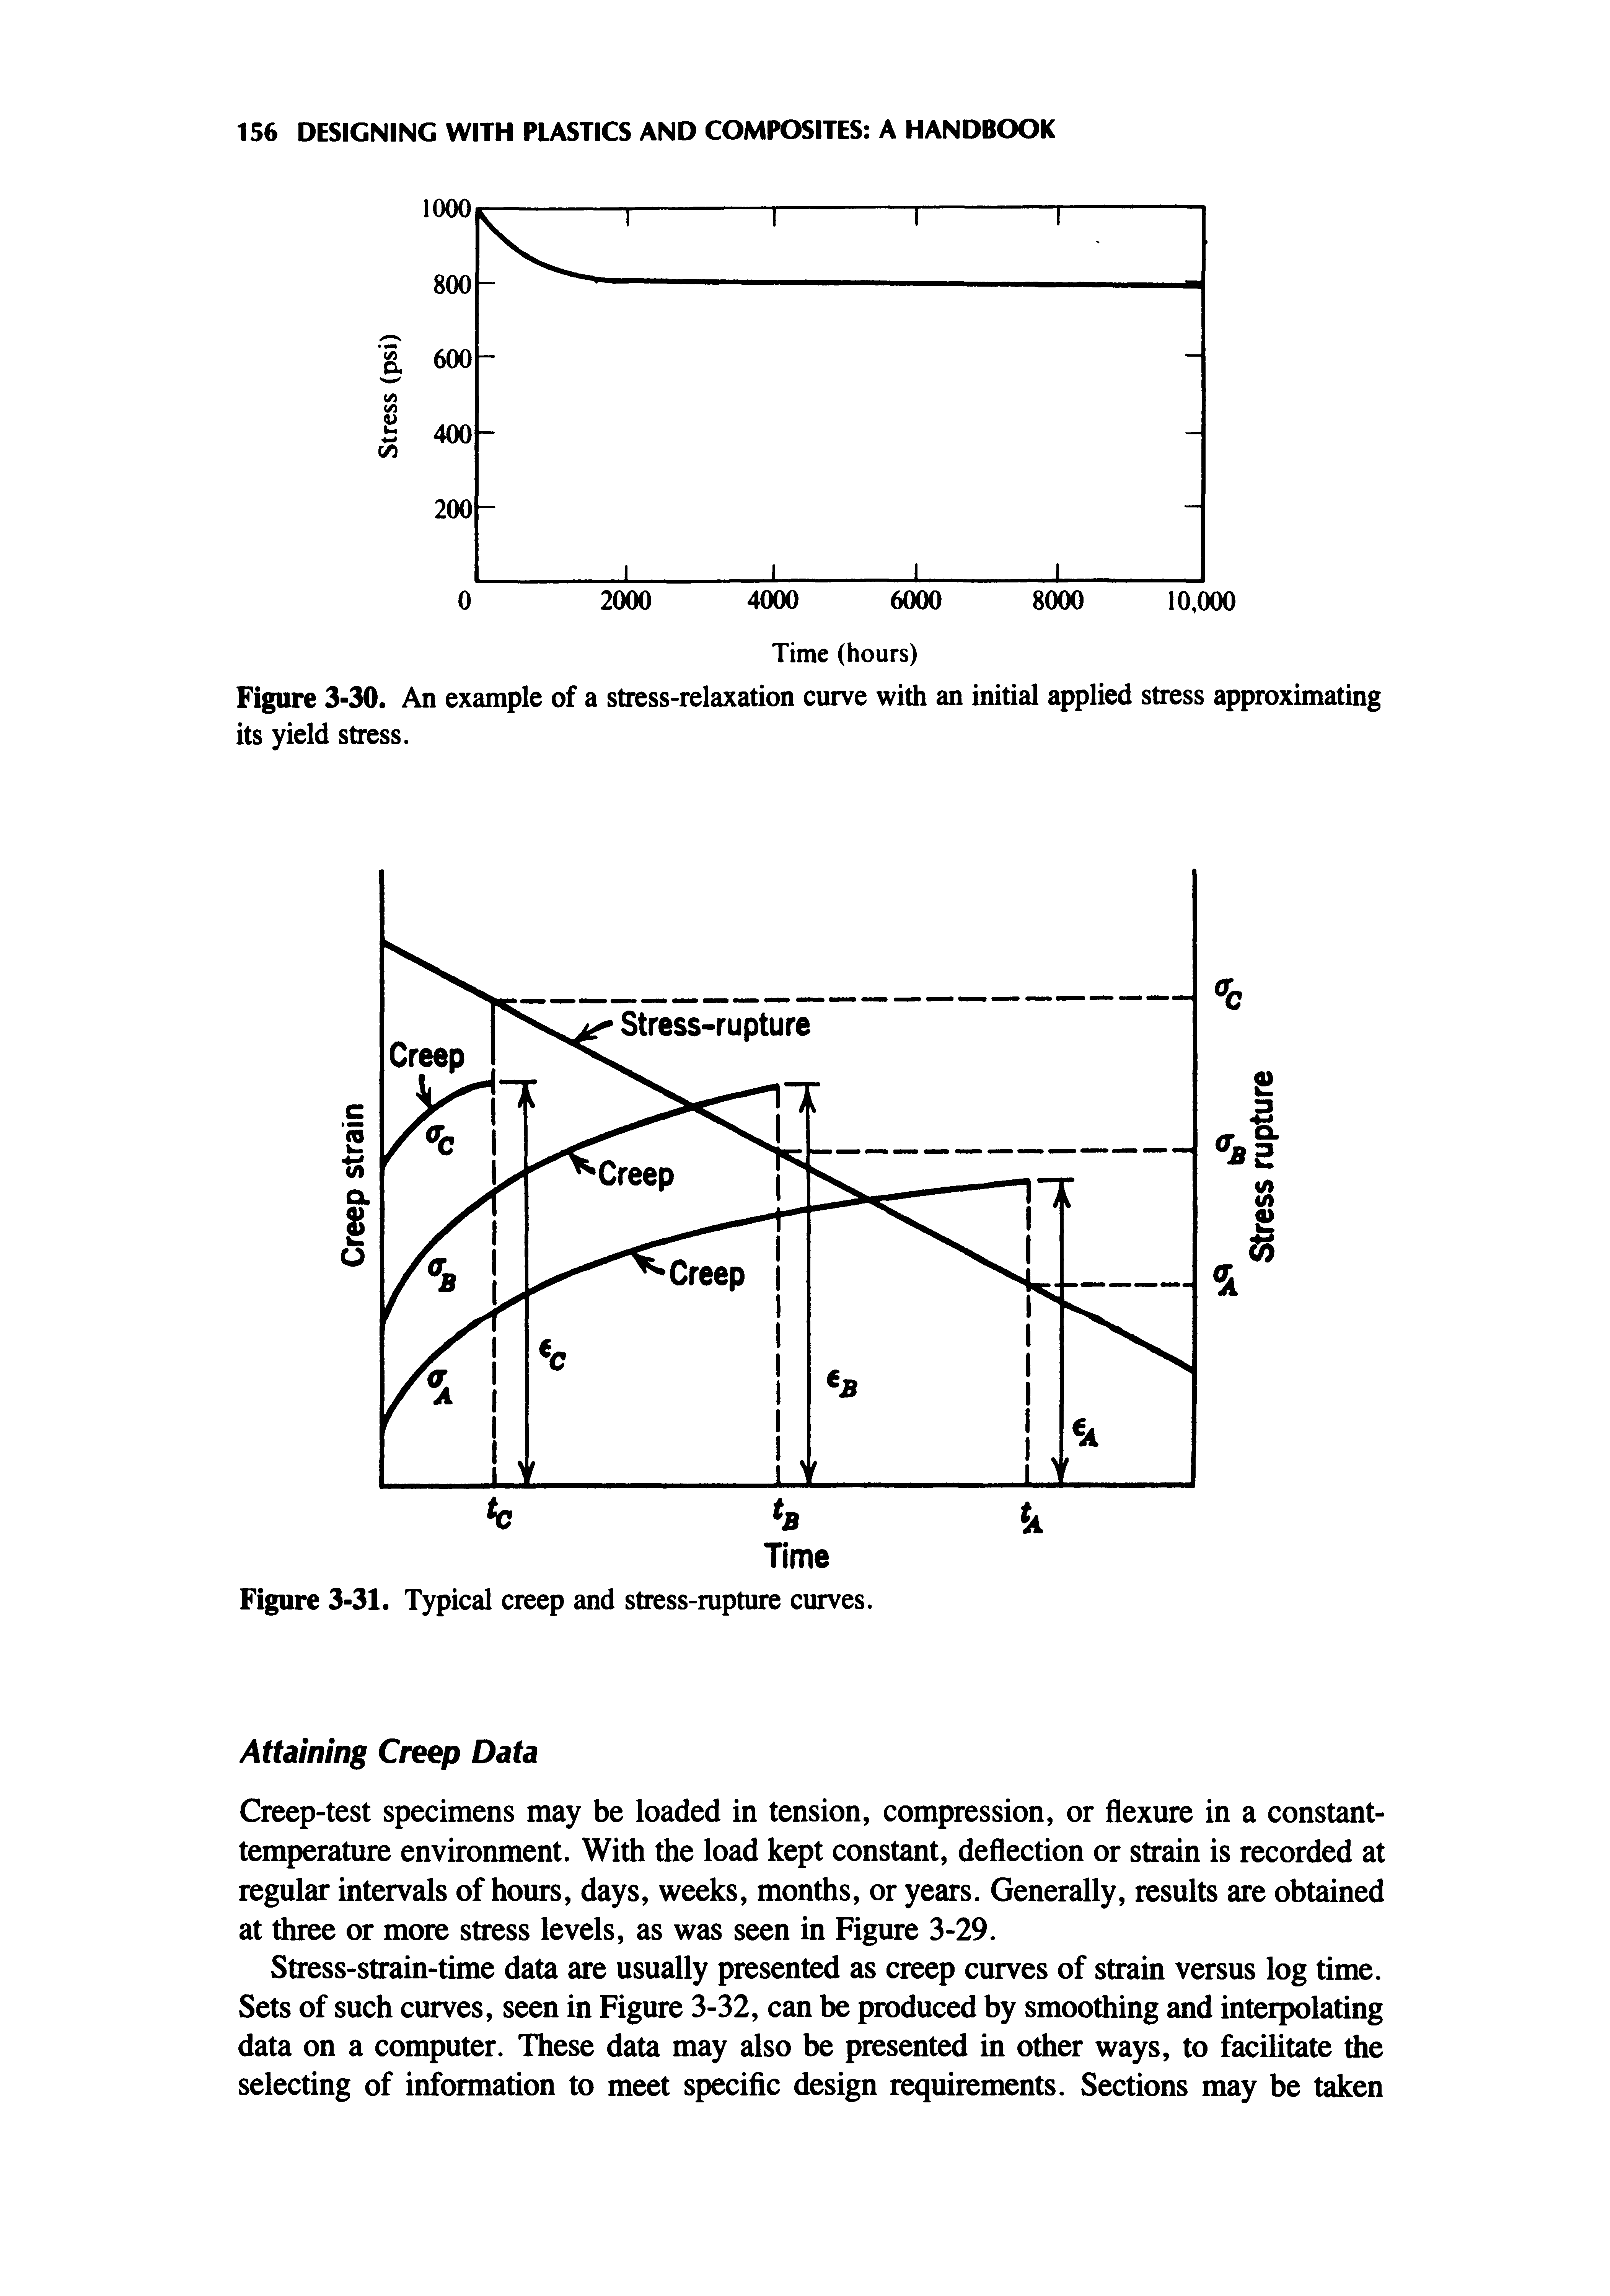 Figure 3-30. An example of a stress-relaxation curve with an initial applied stress approximating its yield stress.